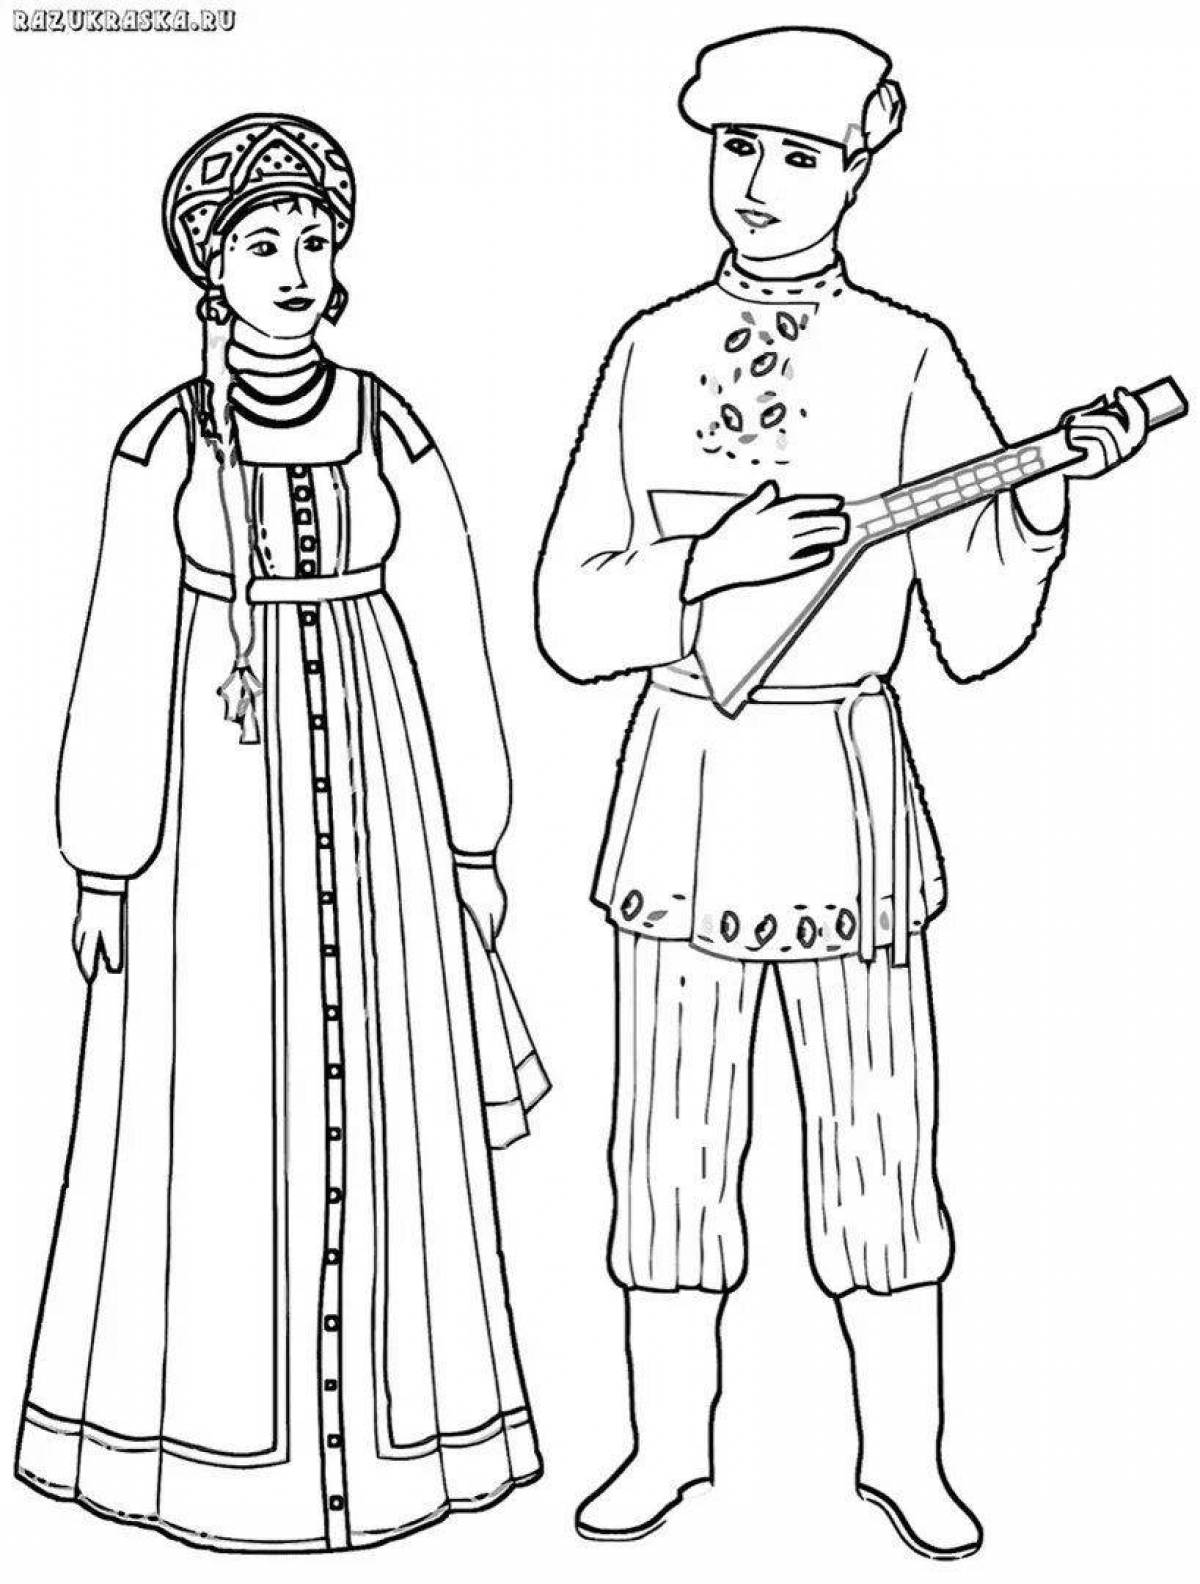 Coloring page inviting Cossack costume